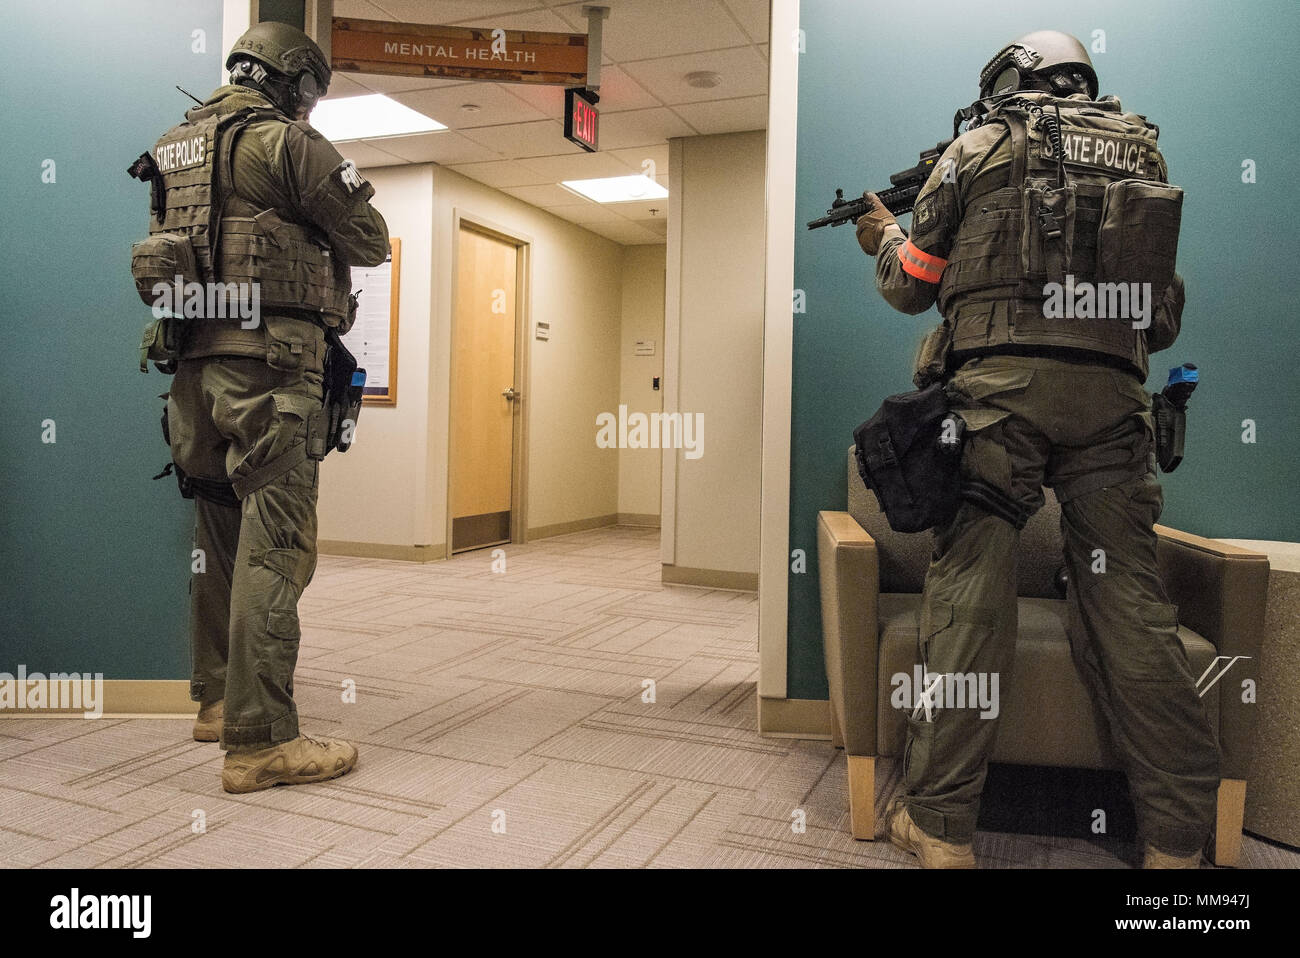 Two Delaware State Police Special Weapons and Tactics team members take  positions outside of the Mental Health clinic during an active shooter  exercise Sept. 12, 2017, at the Base Clinic, Dover Air